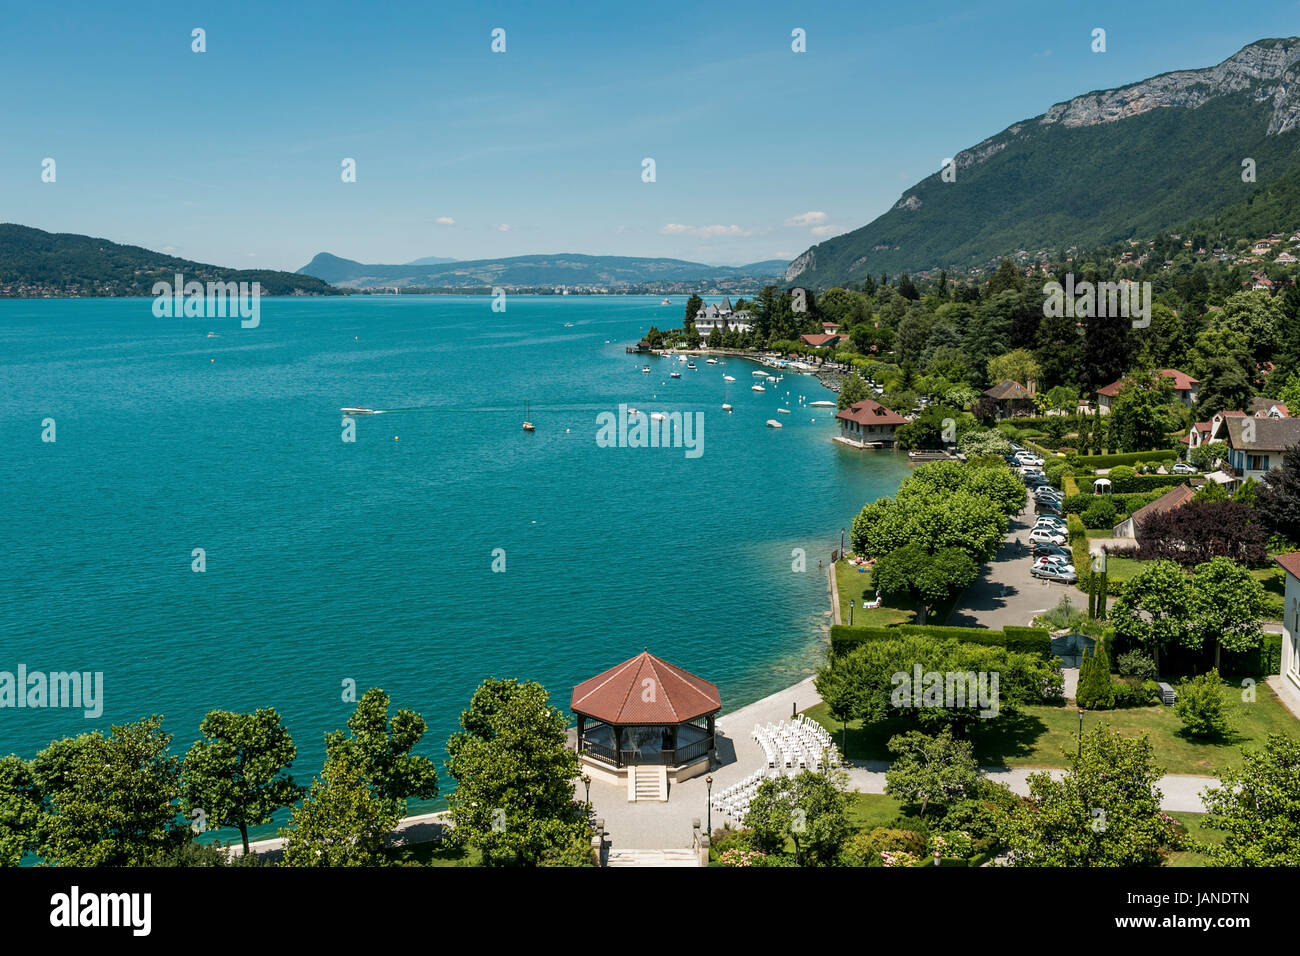 Lake Annecy, France Stock Photo